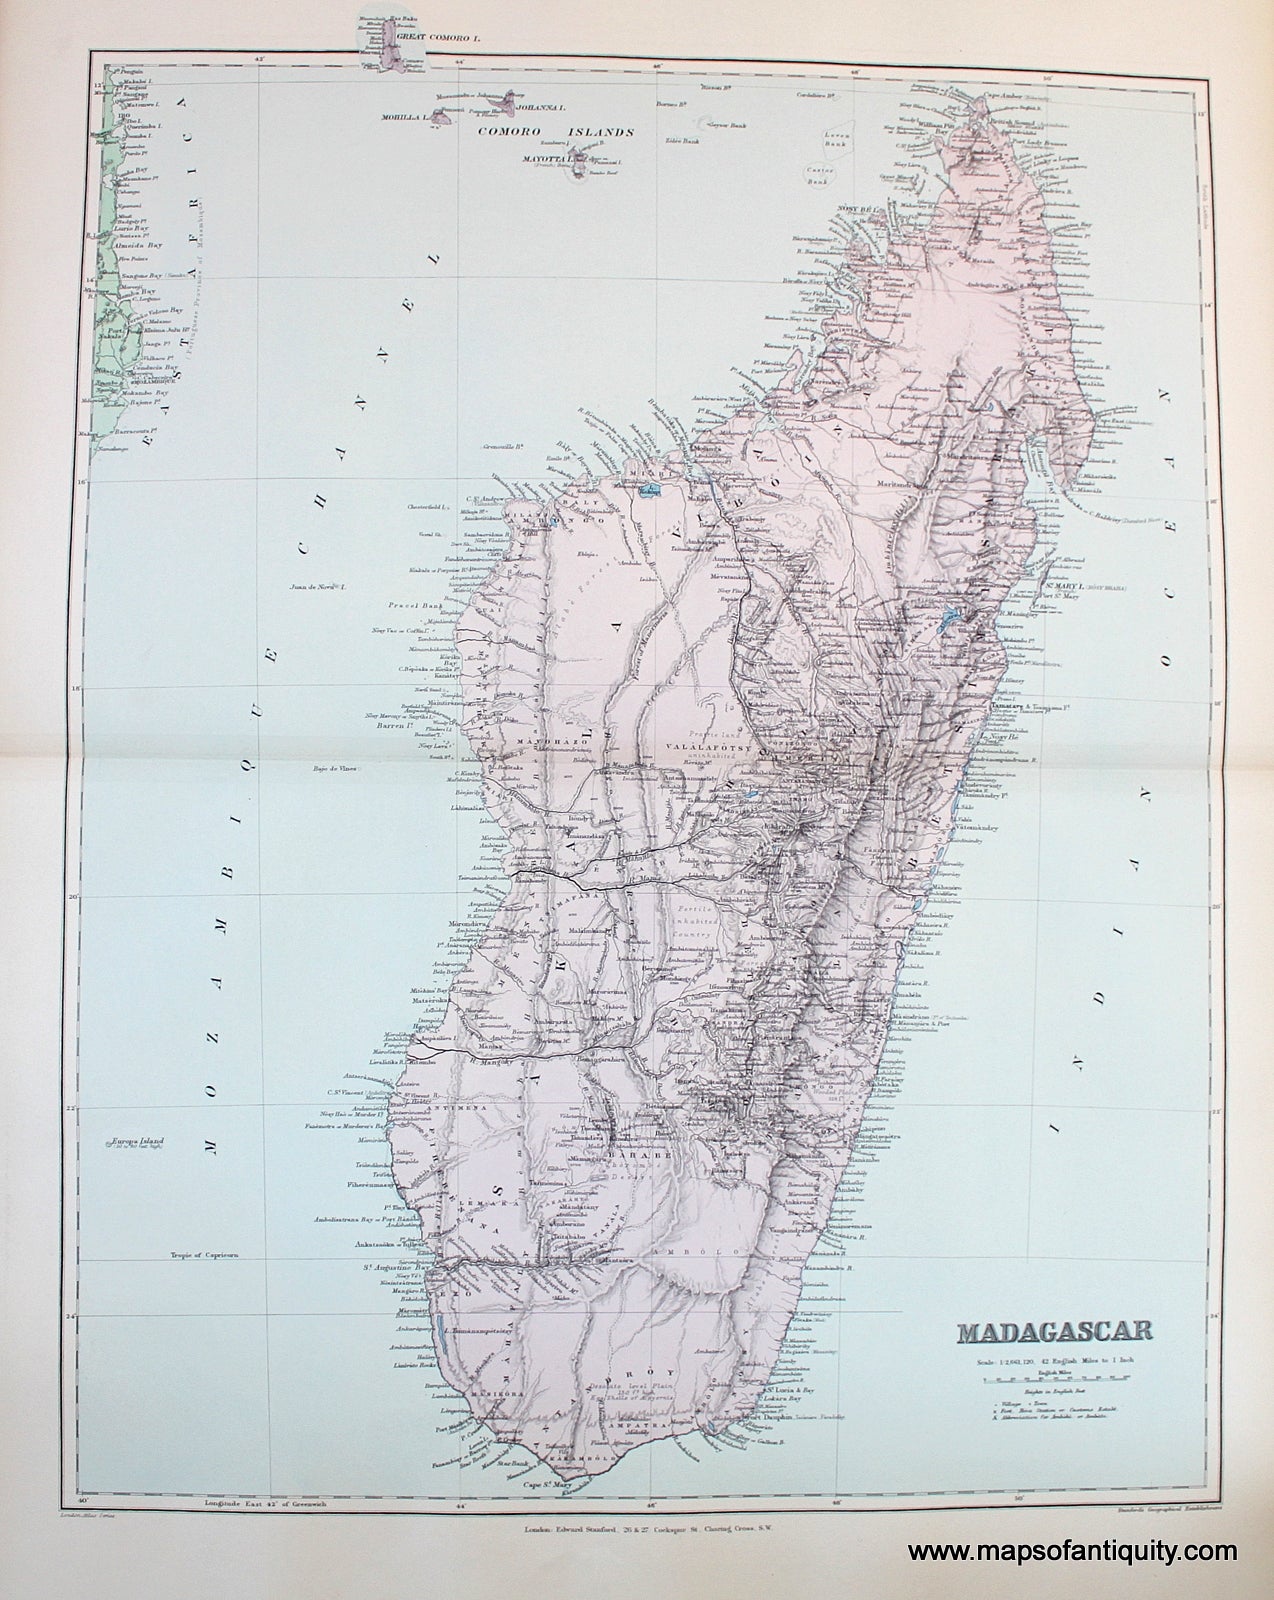 Antique-Hand-Colored-Map-Madagascar-Africa--1894-Stanford-Maps-Of-Antiquity